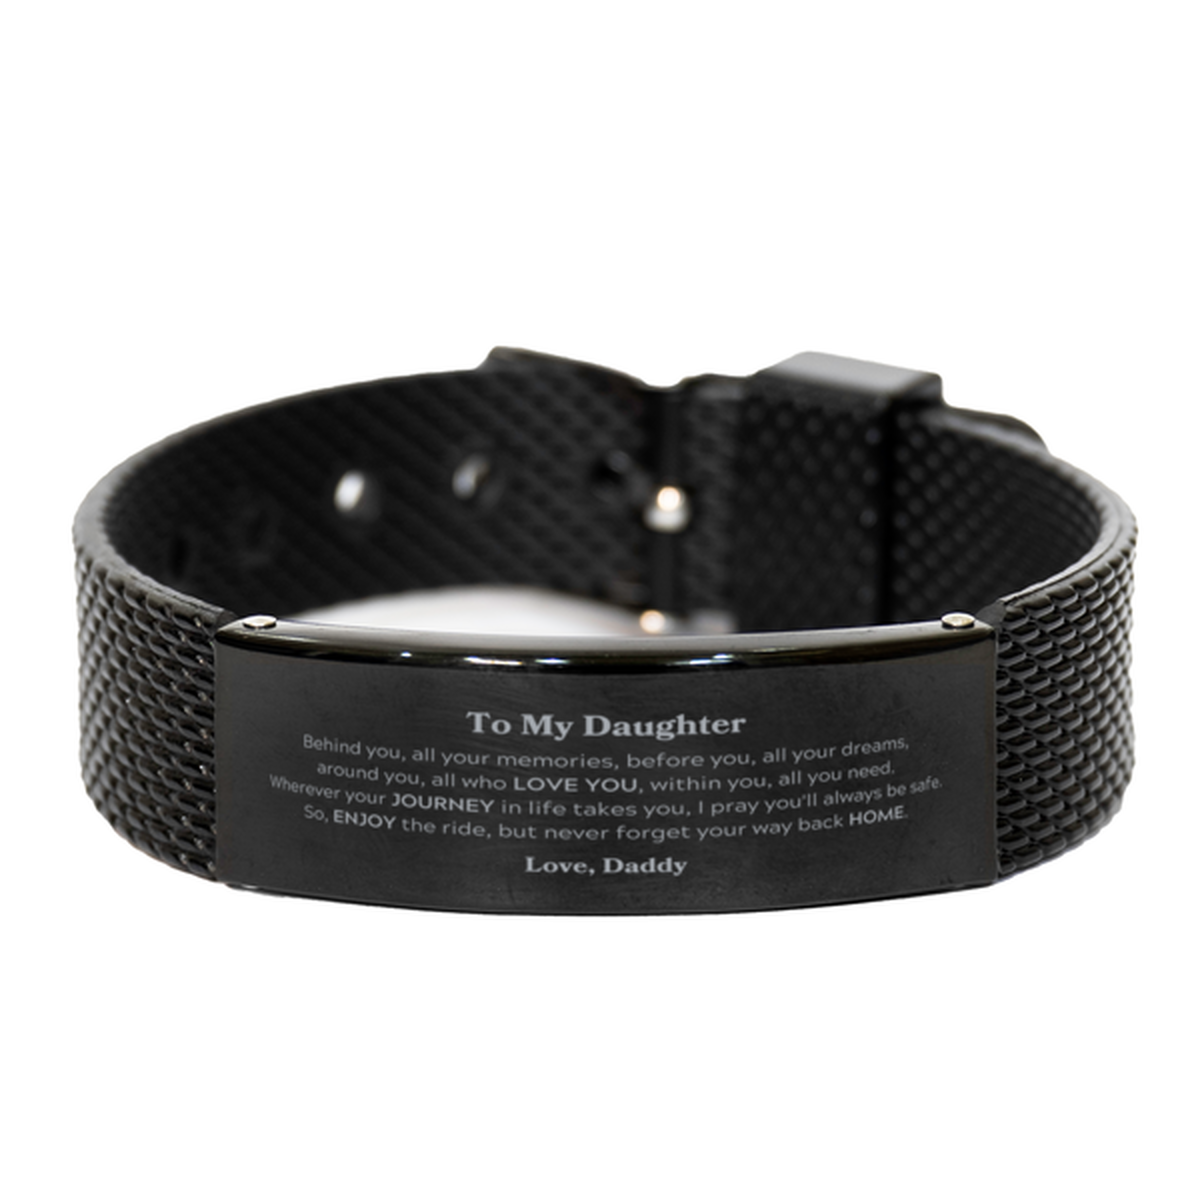 To My Daughter Graduation Gifts from Daddy, Daughter Black Shark Mesh Bracelet Christmas Birthday Gifts for Daughter Behind you, all your memories, before you, all your dreams. Love, Daddy